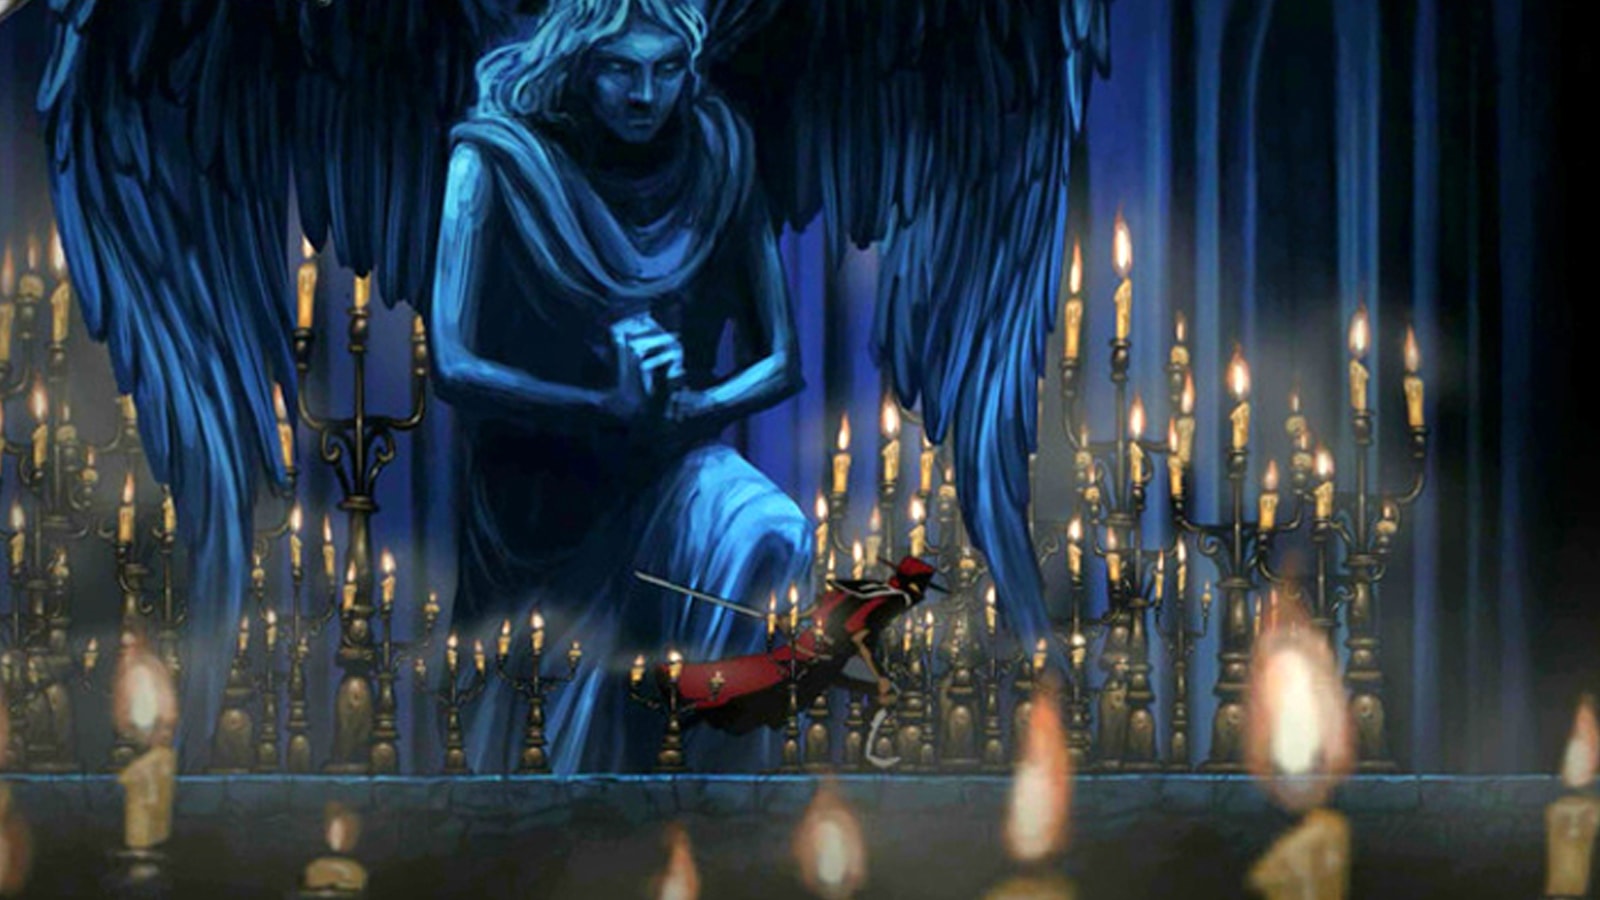 A swordsman in red dashes past an ominous angel statue in a hallway full of lit candelabras.